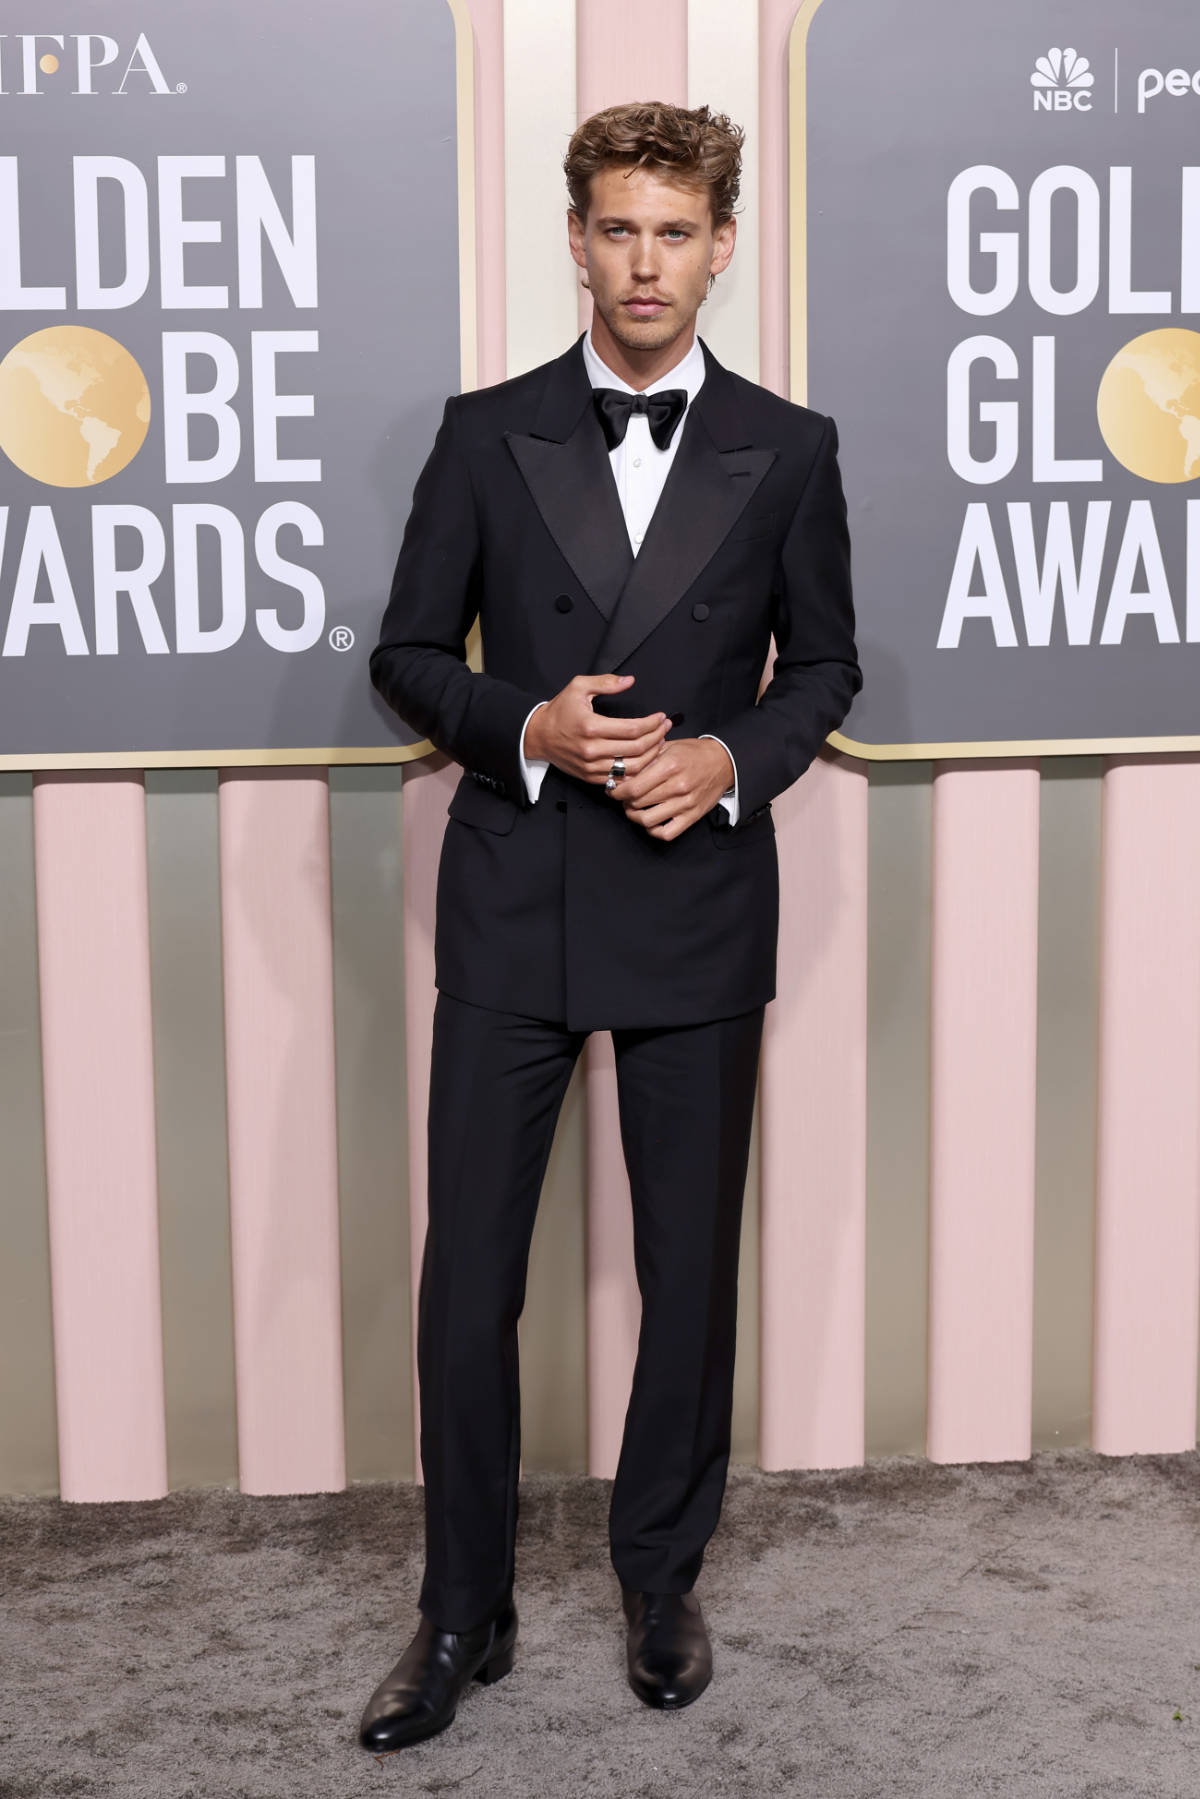 VIPs In Gucci At The 80th Golden Globe Awards In Los Angeles